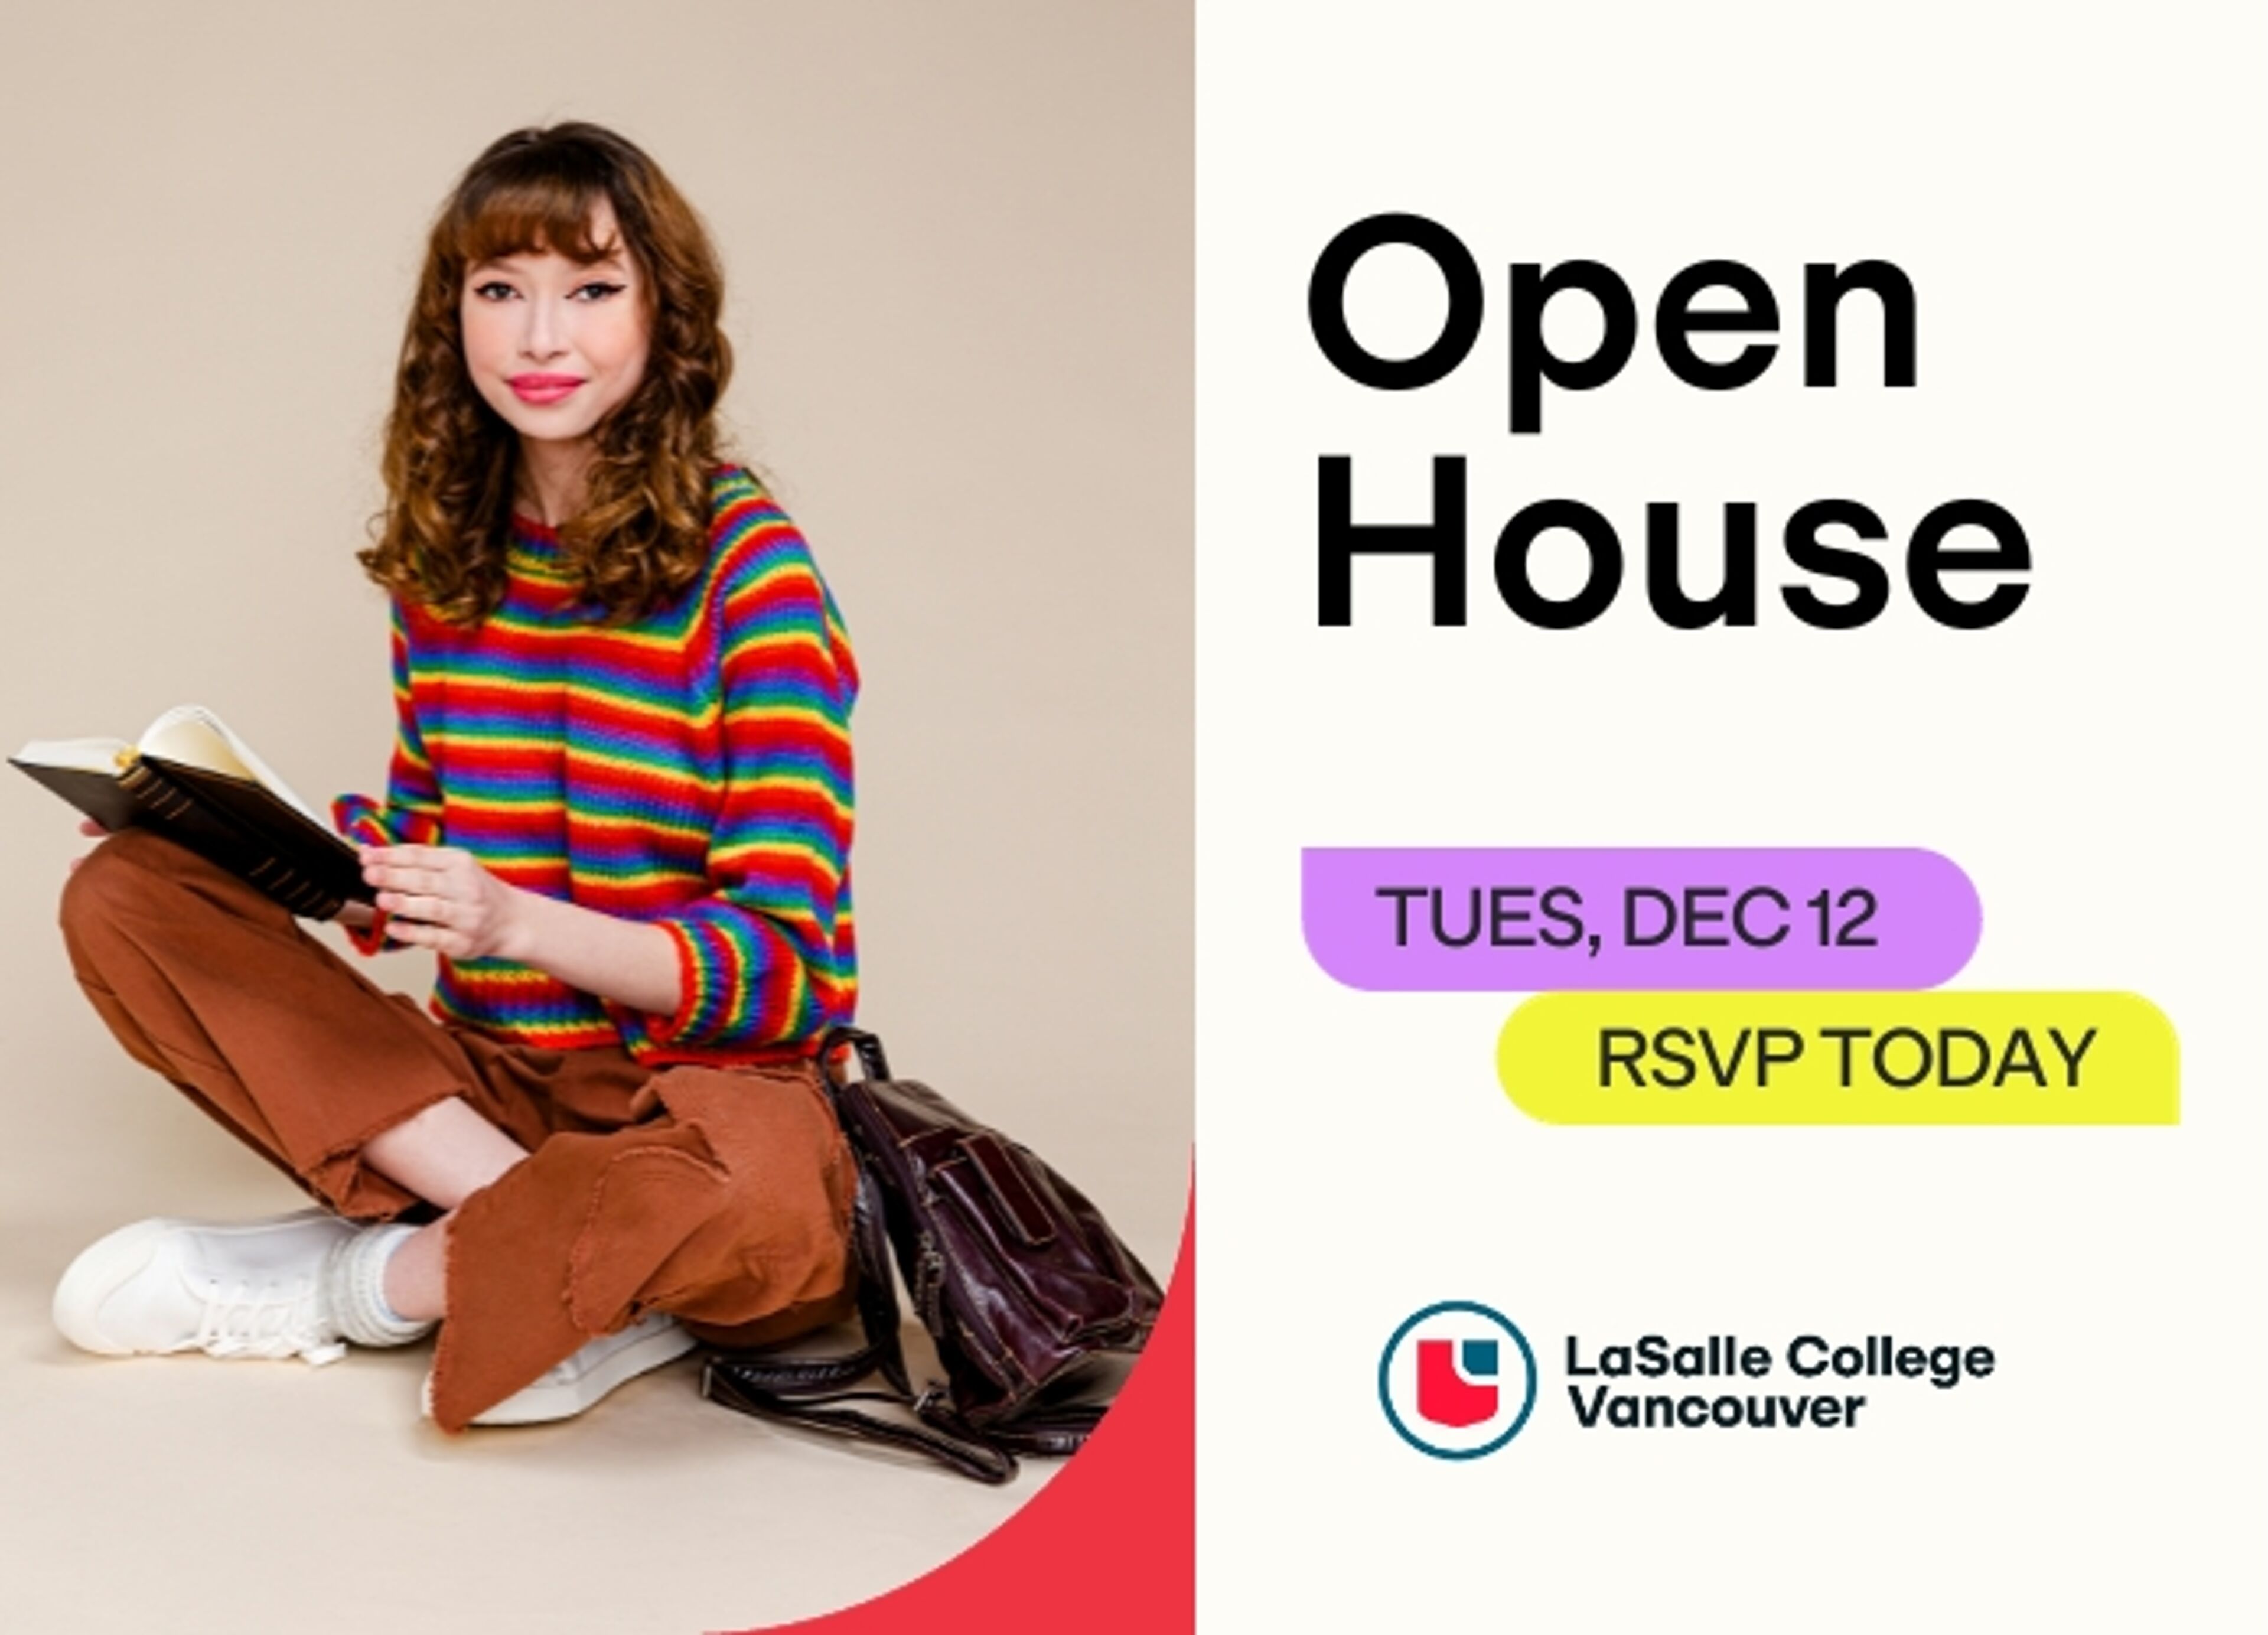 Promotional image featuring a young woman sitting with a book, dressed in a colorful striped sweater and brown trousers, advertising an open house event at LaSalle College Vancouver on December 12.